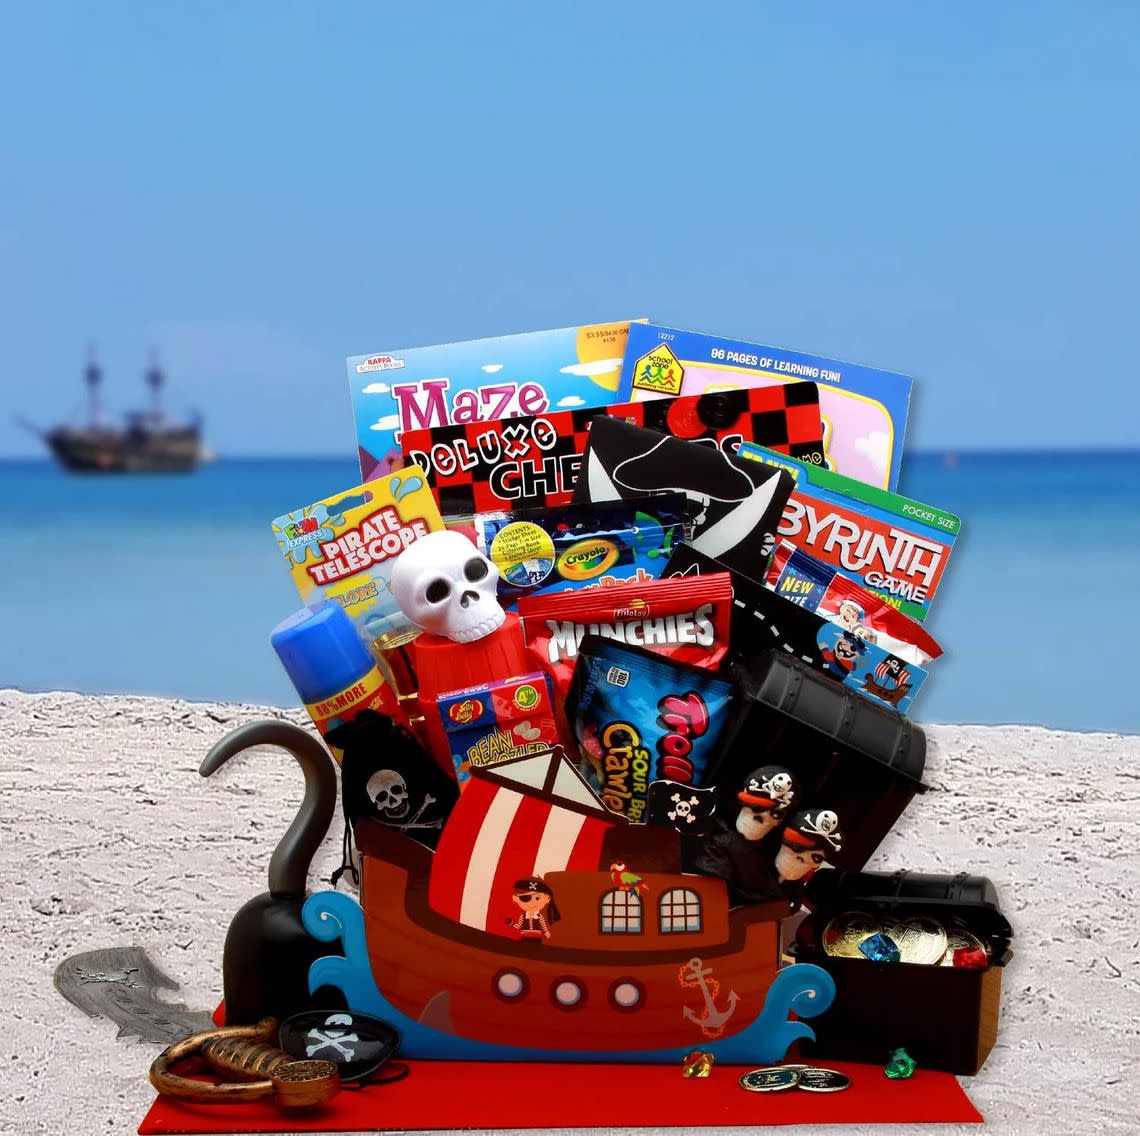 Pirate Gift Box filled with pirate-themed toys and treats